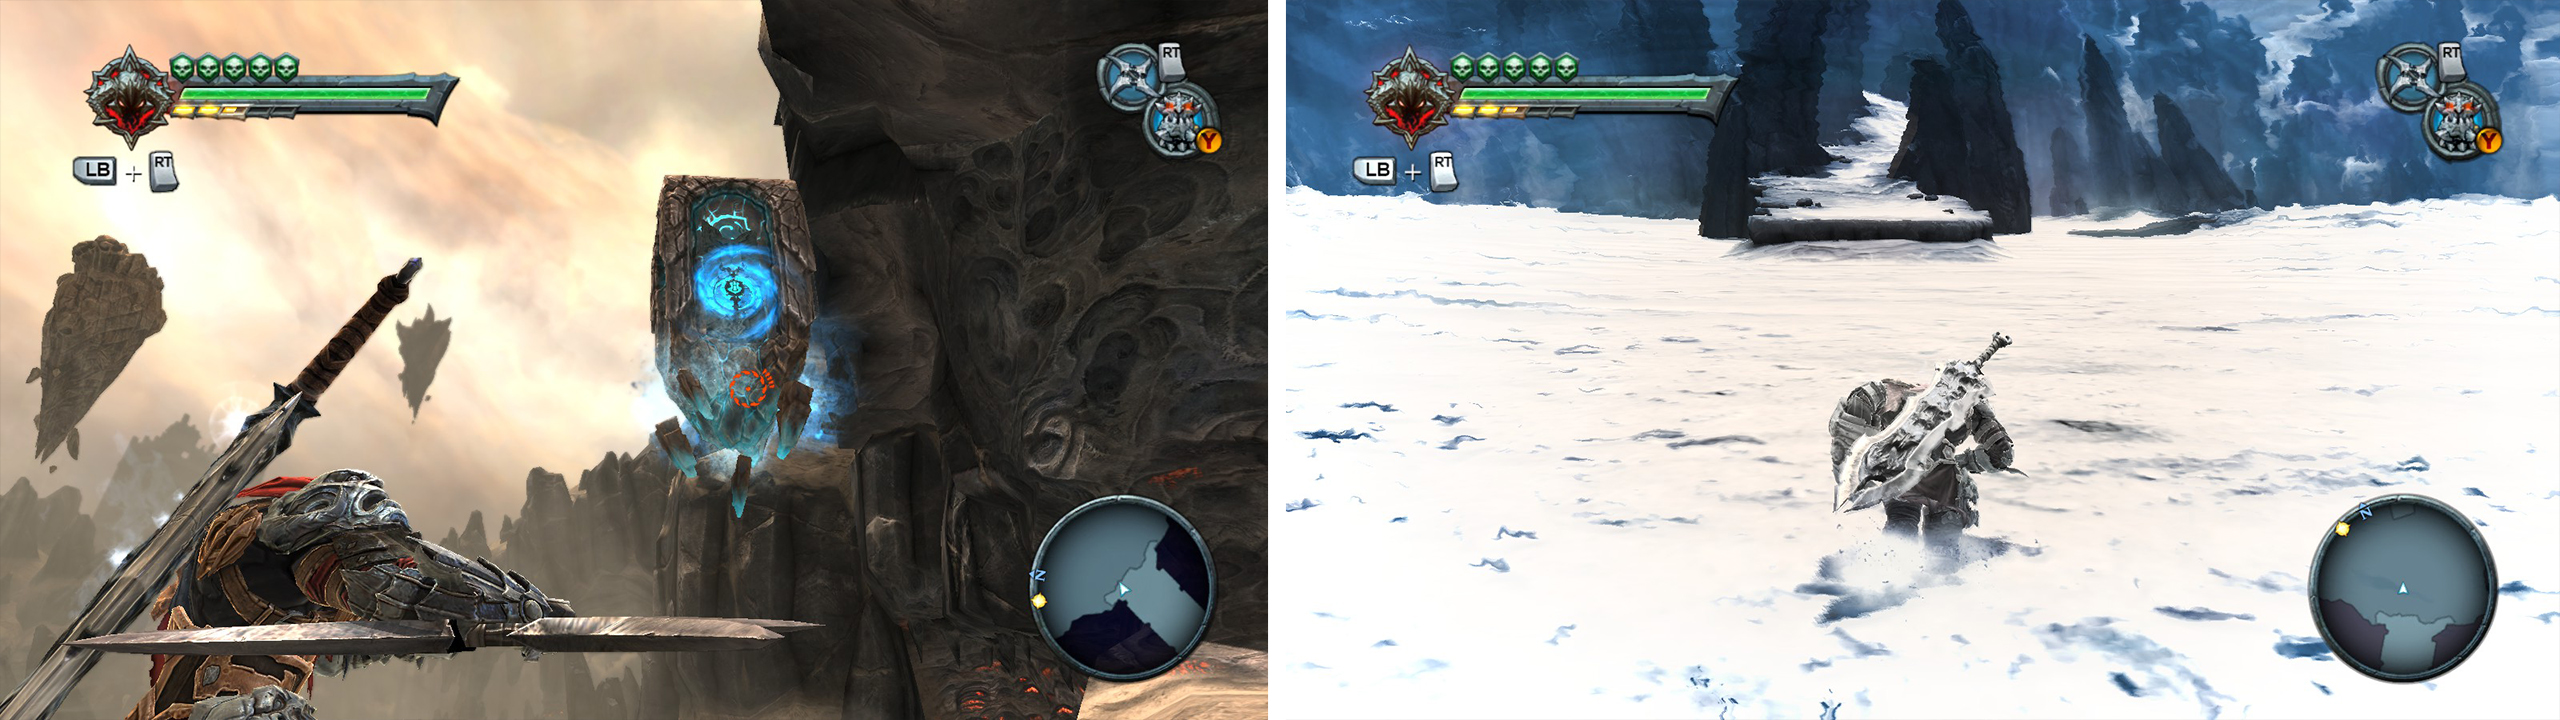 Hit the chronosphere (left) and make your way to the safe spot (right) across the sand.